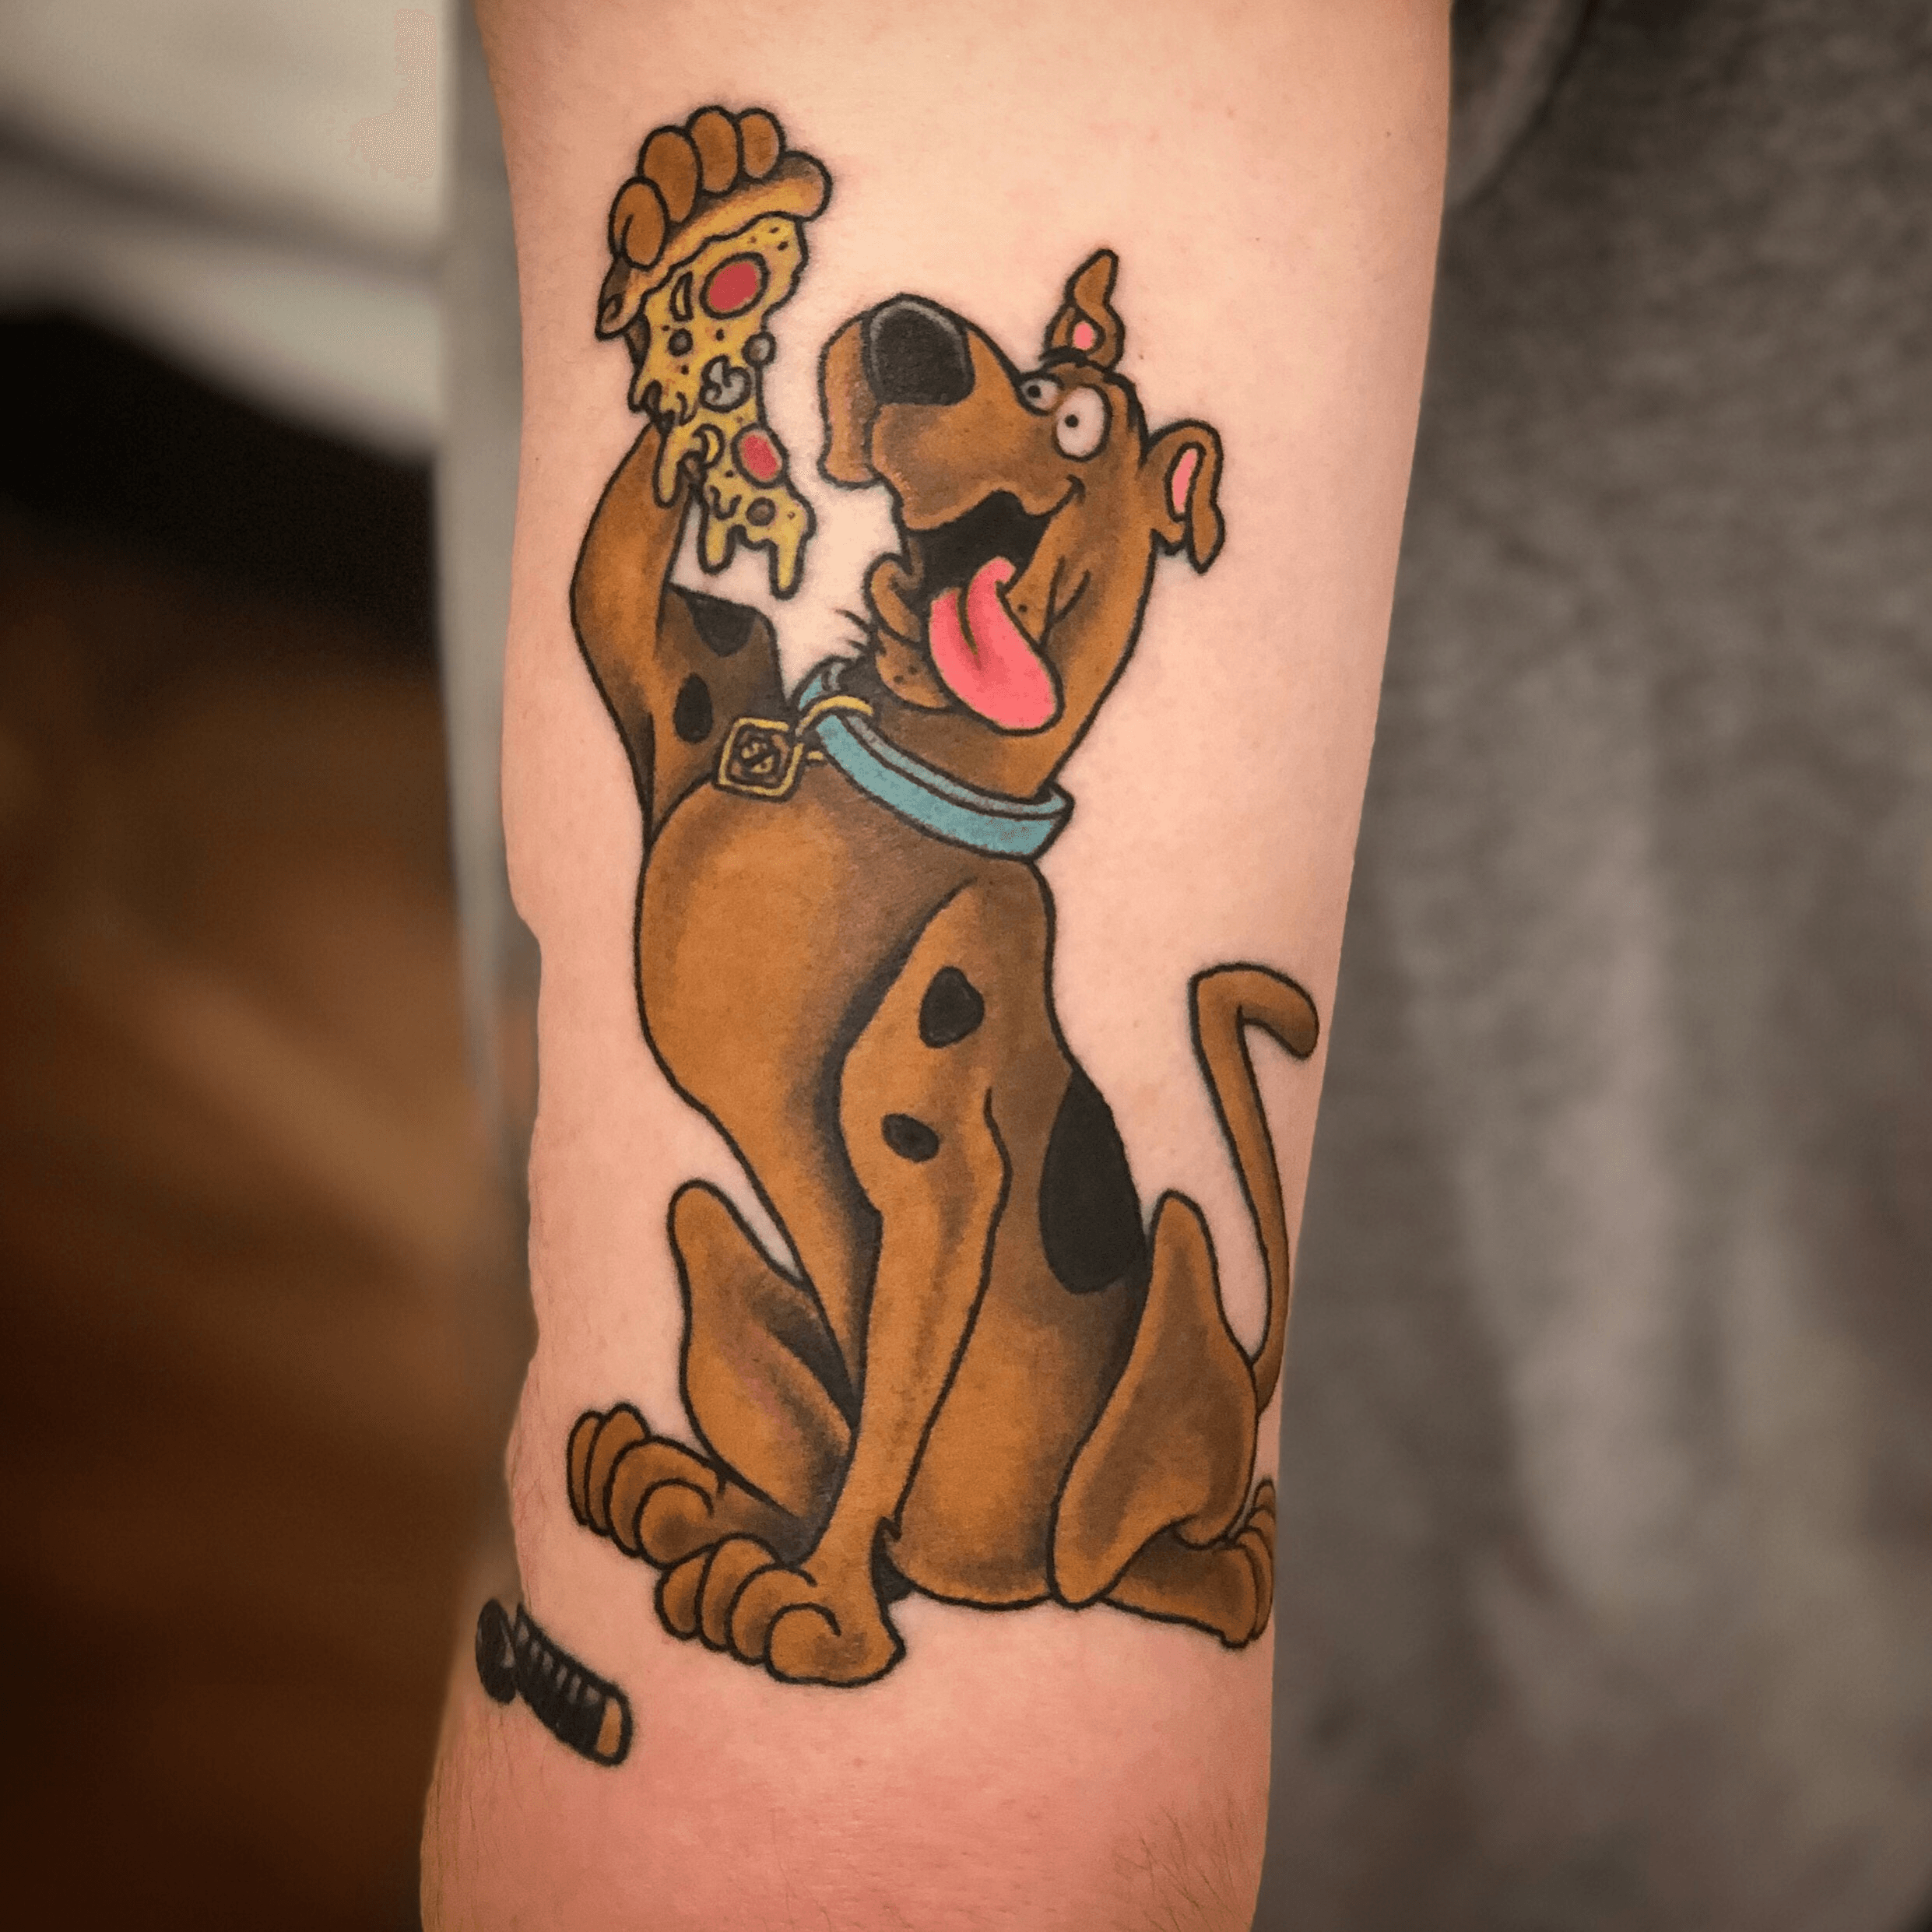 40 Now thats a Scooby Doo tattoo ideas  scooby doo tattoo scooby scooby  doo